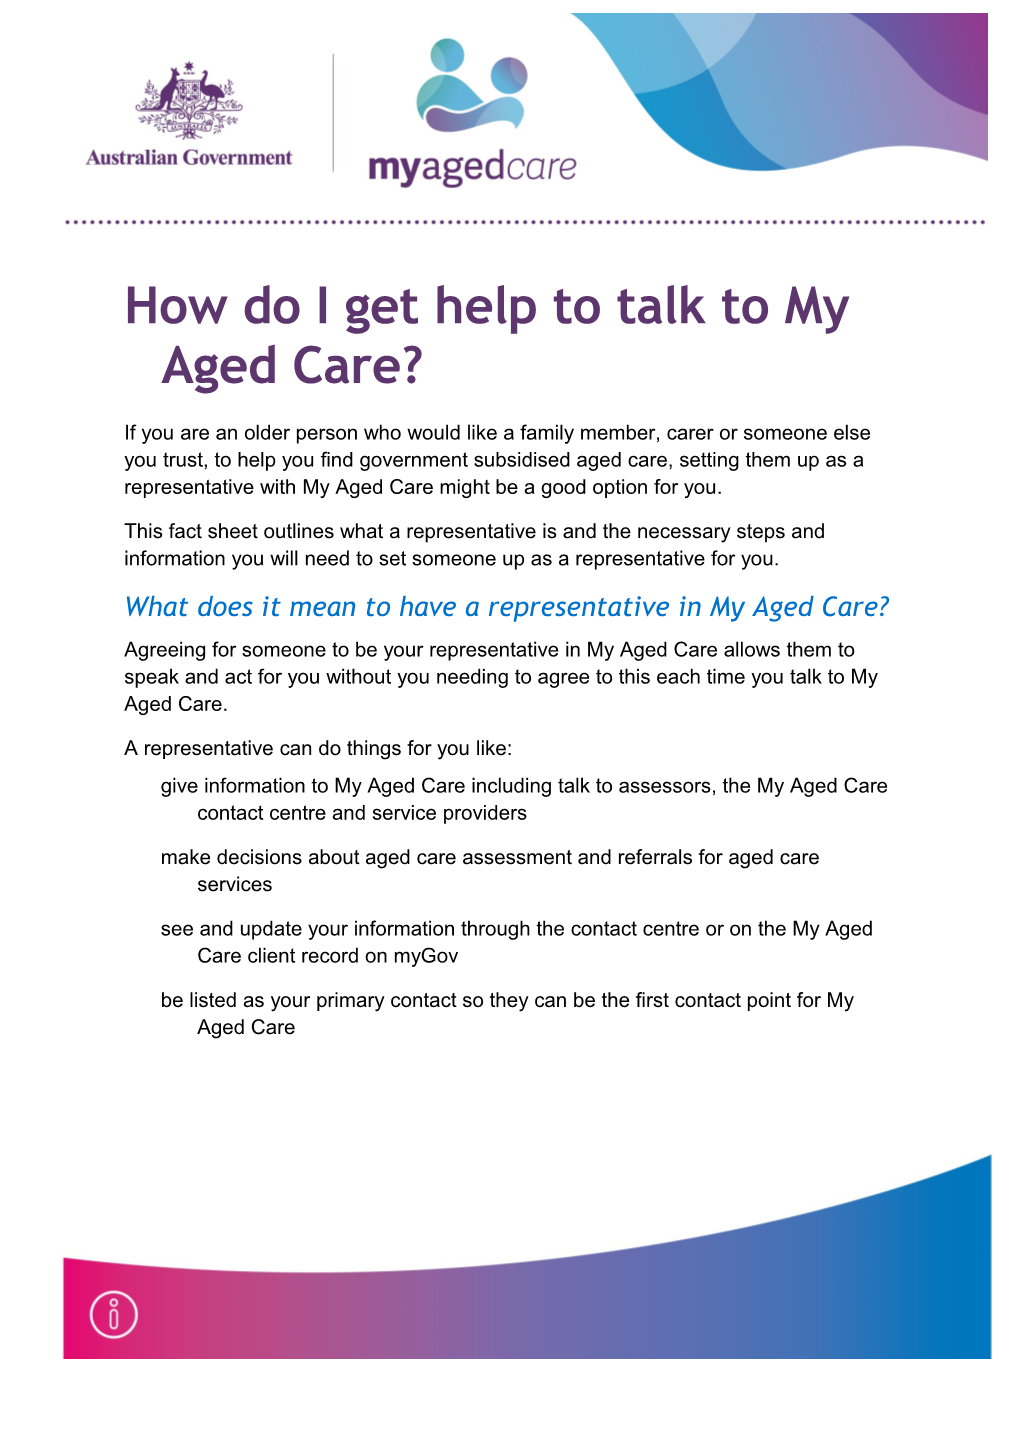 How Do I Get Help to Talk to My Aged Care?